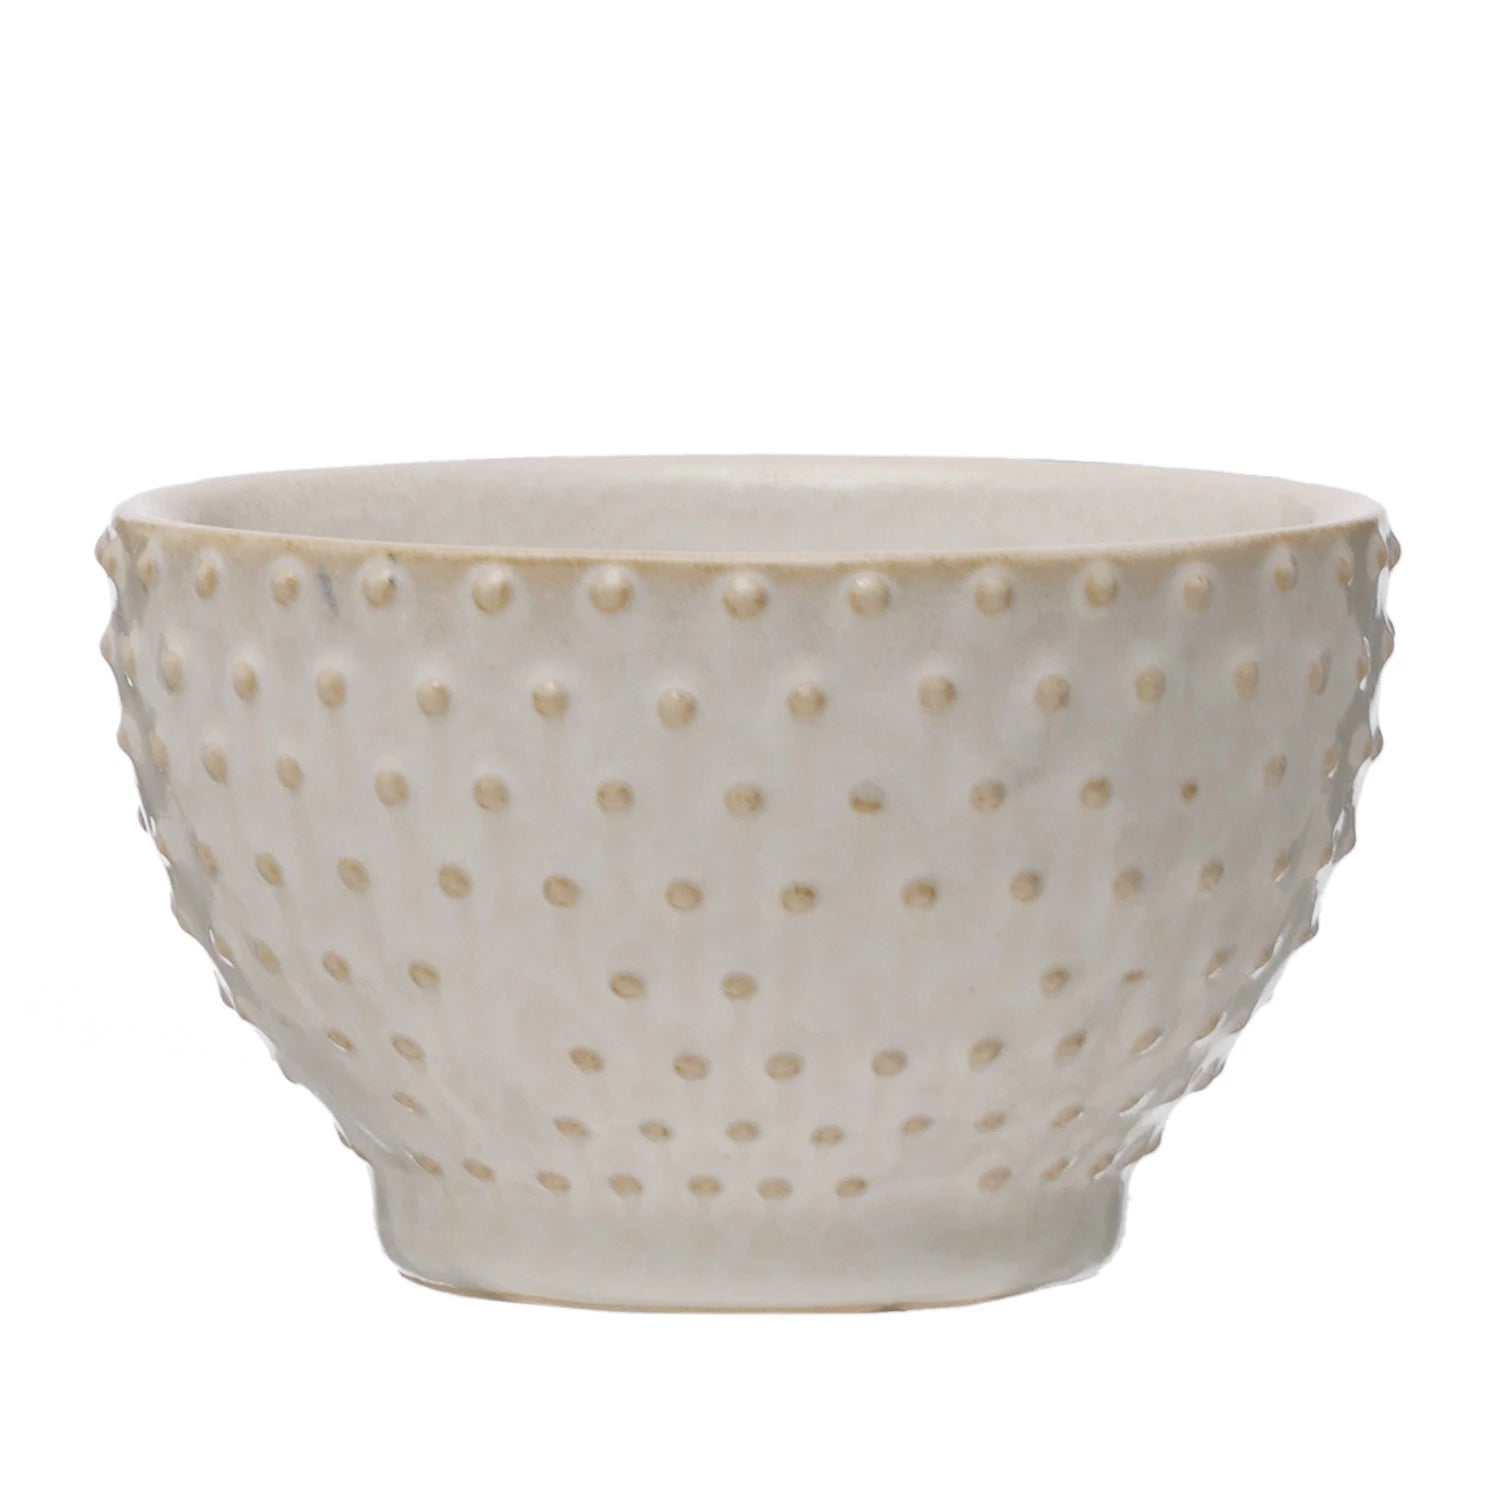 Embossed Hobnail Bowl, The Feathered Farmhouse